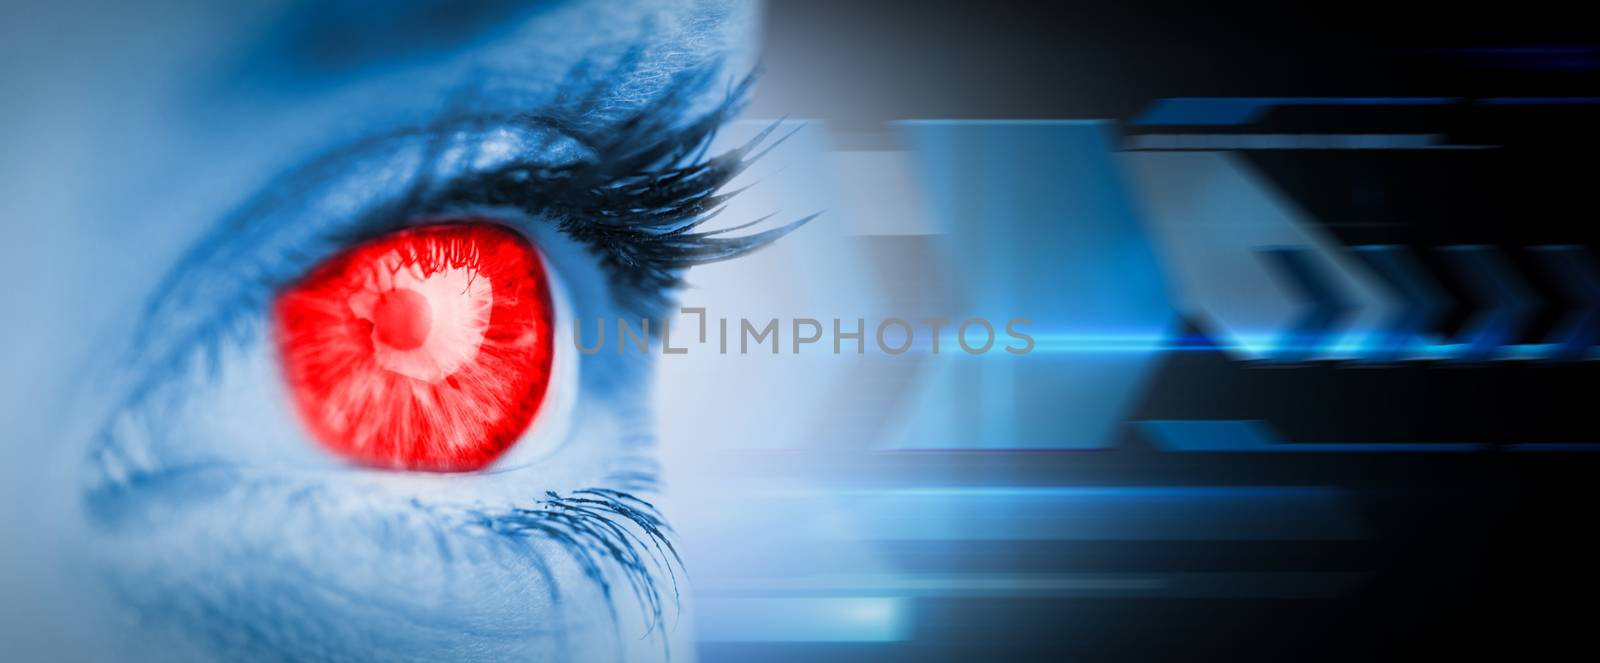 Red eye on blue face against arrows on technical background